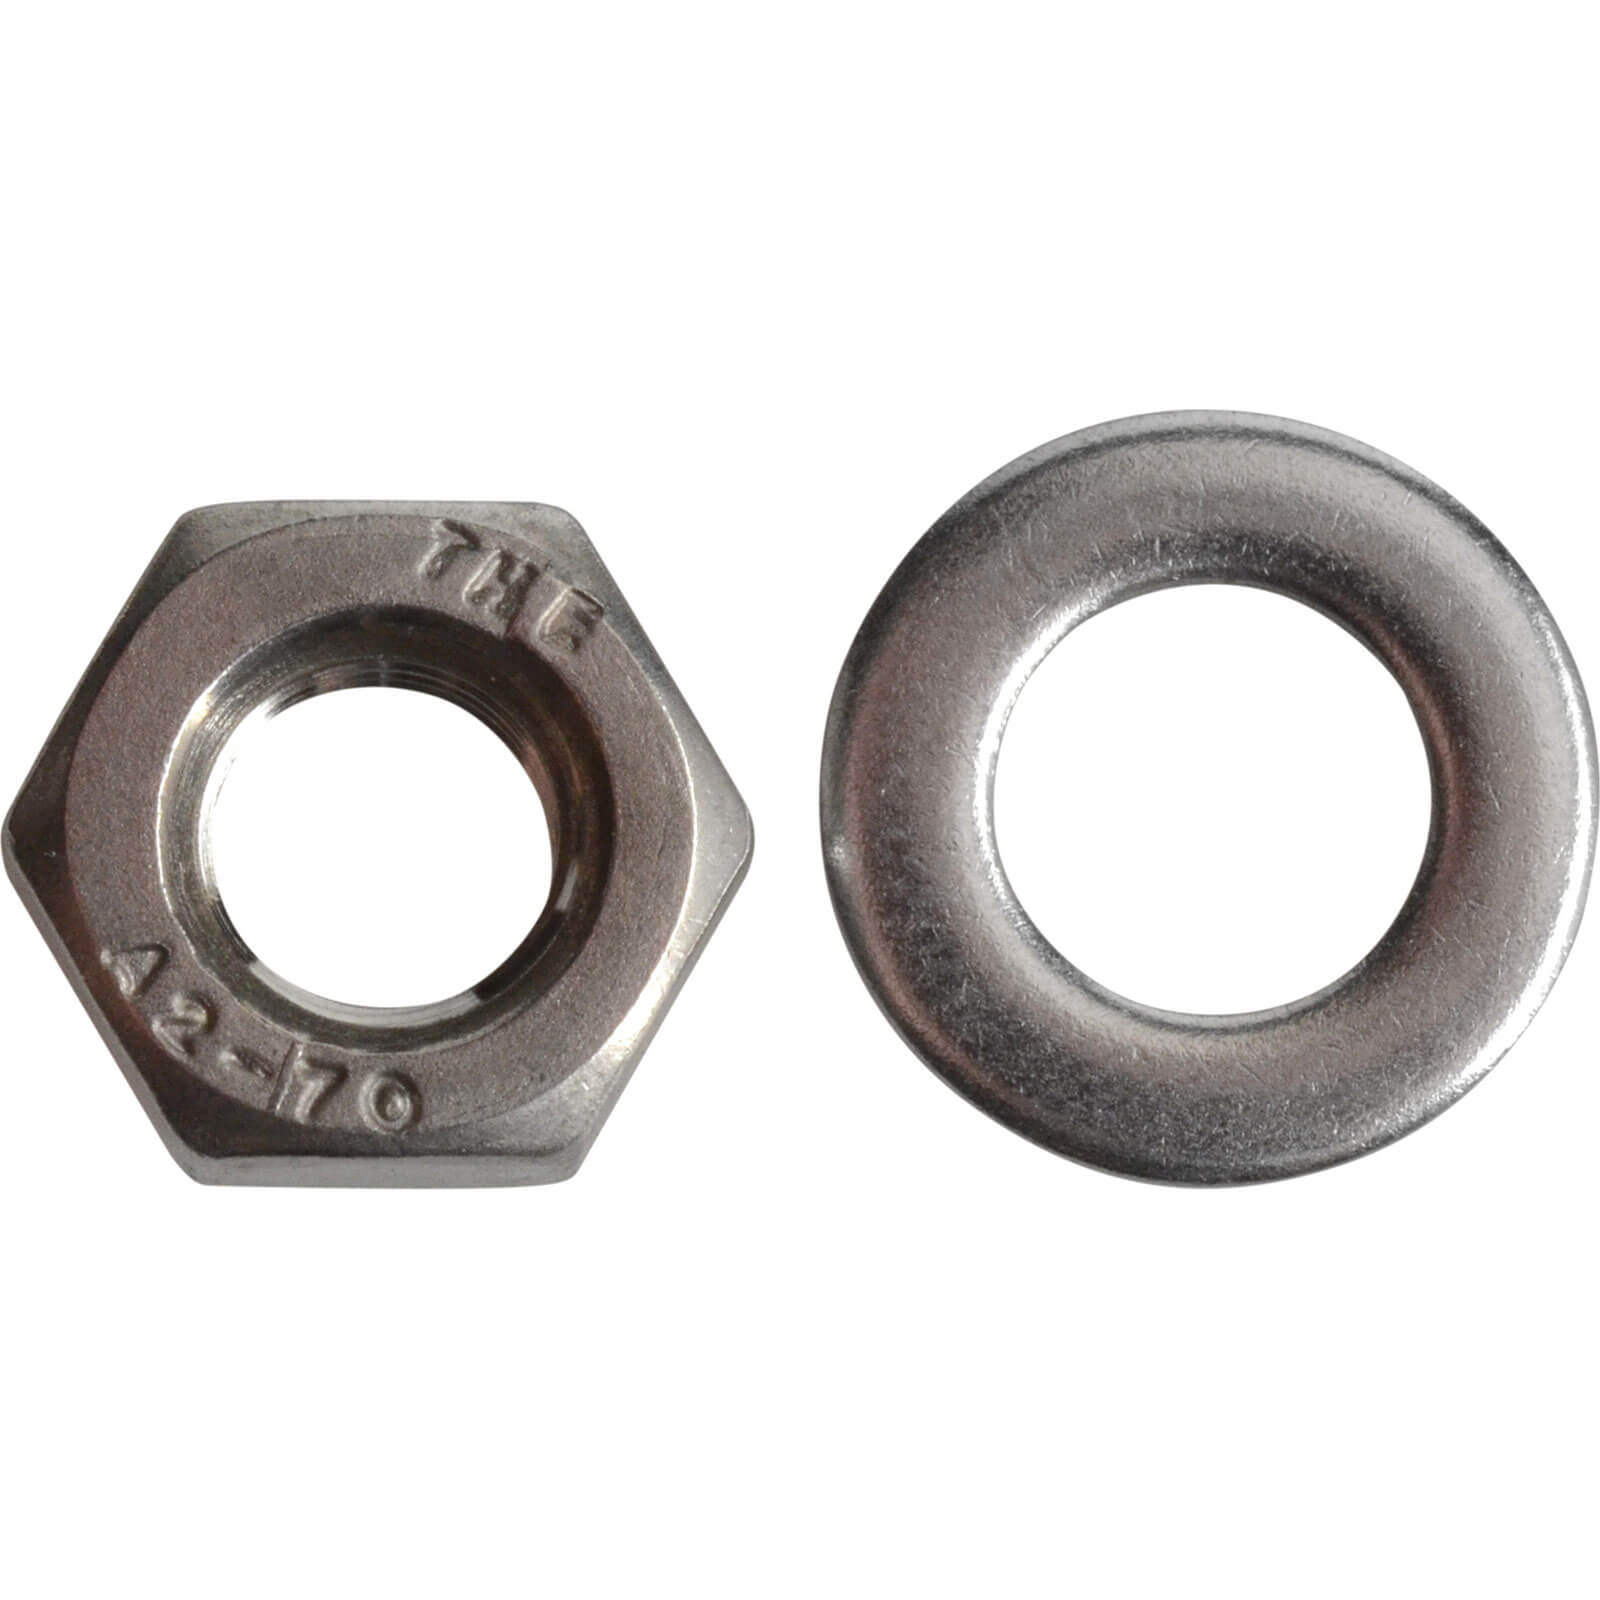 Photo of Forgefix A2 Stainless Steel Nuts And Washers M6 Pack Of 20